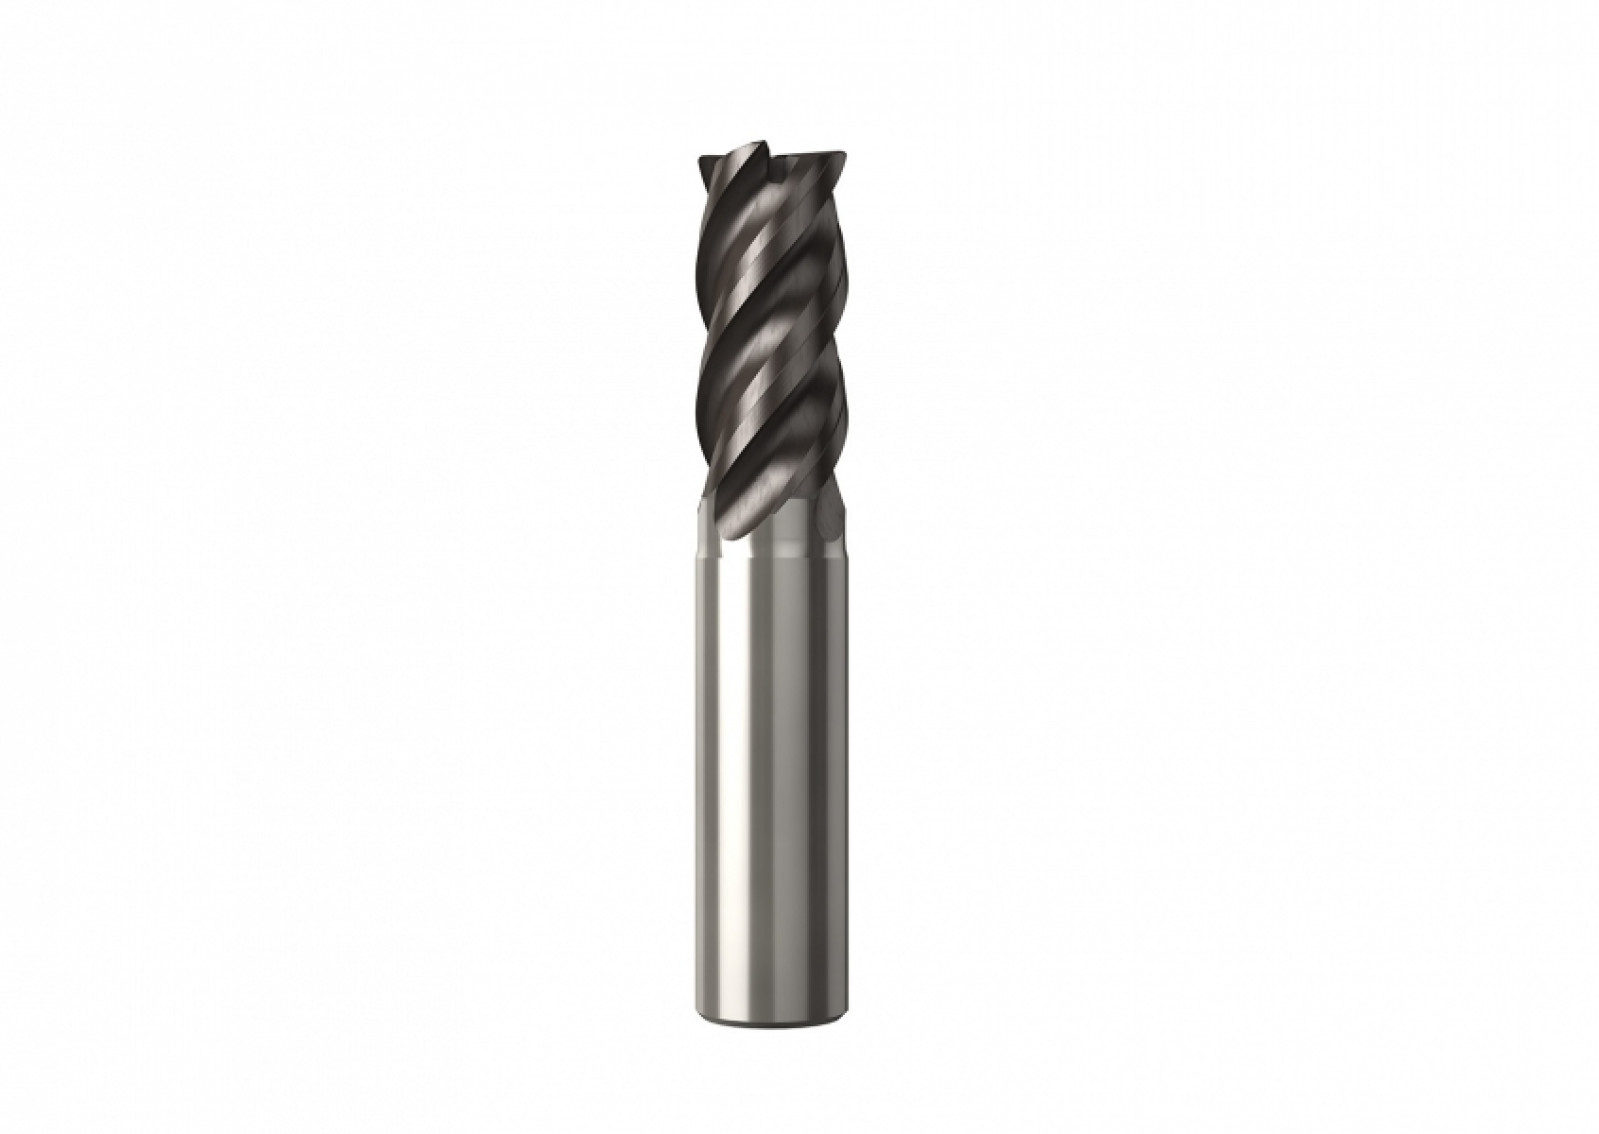 Seco Tools adds roughing and small-diameter four-f...